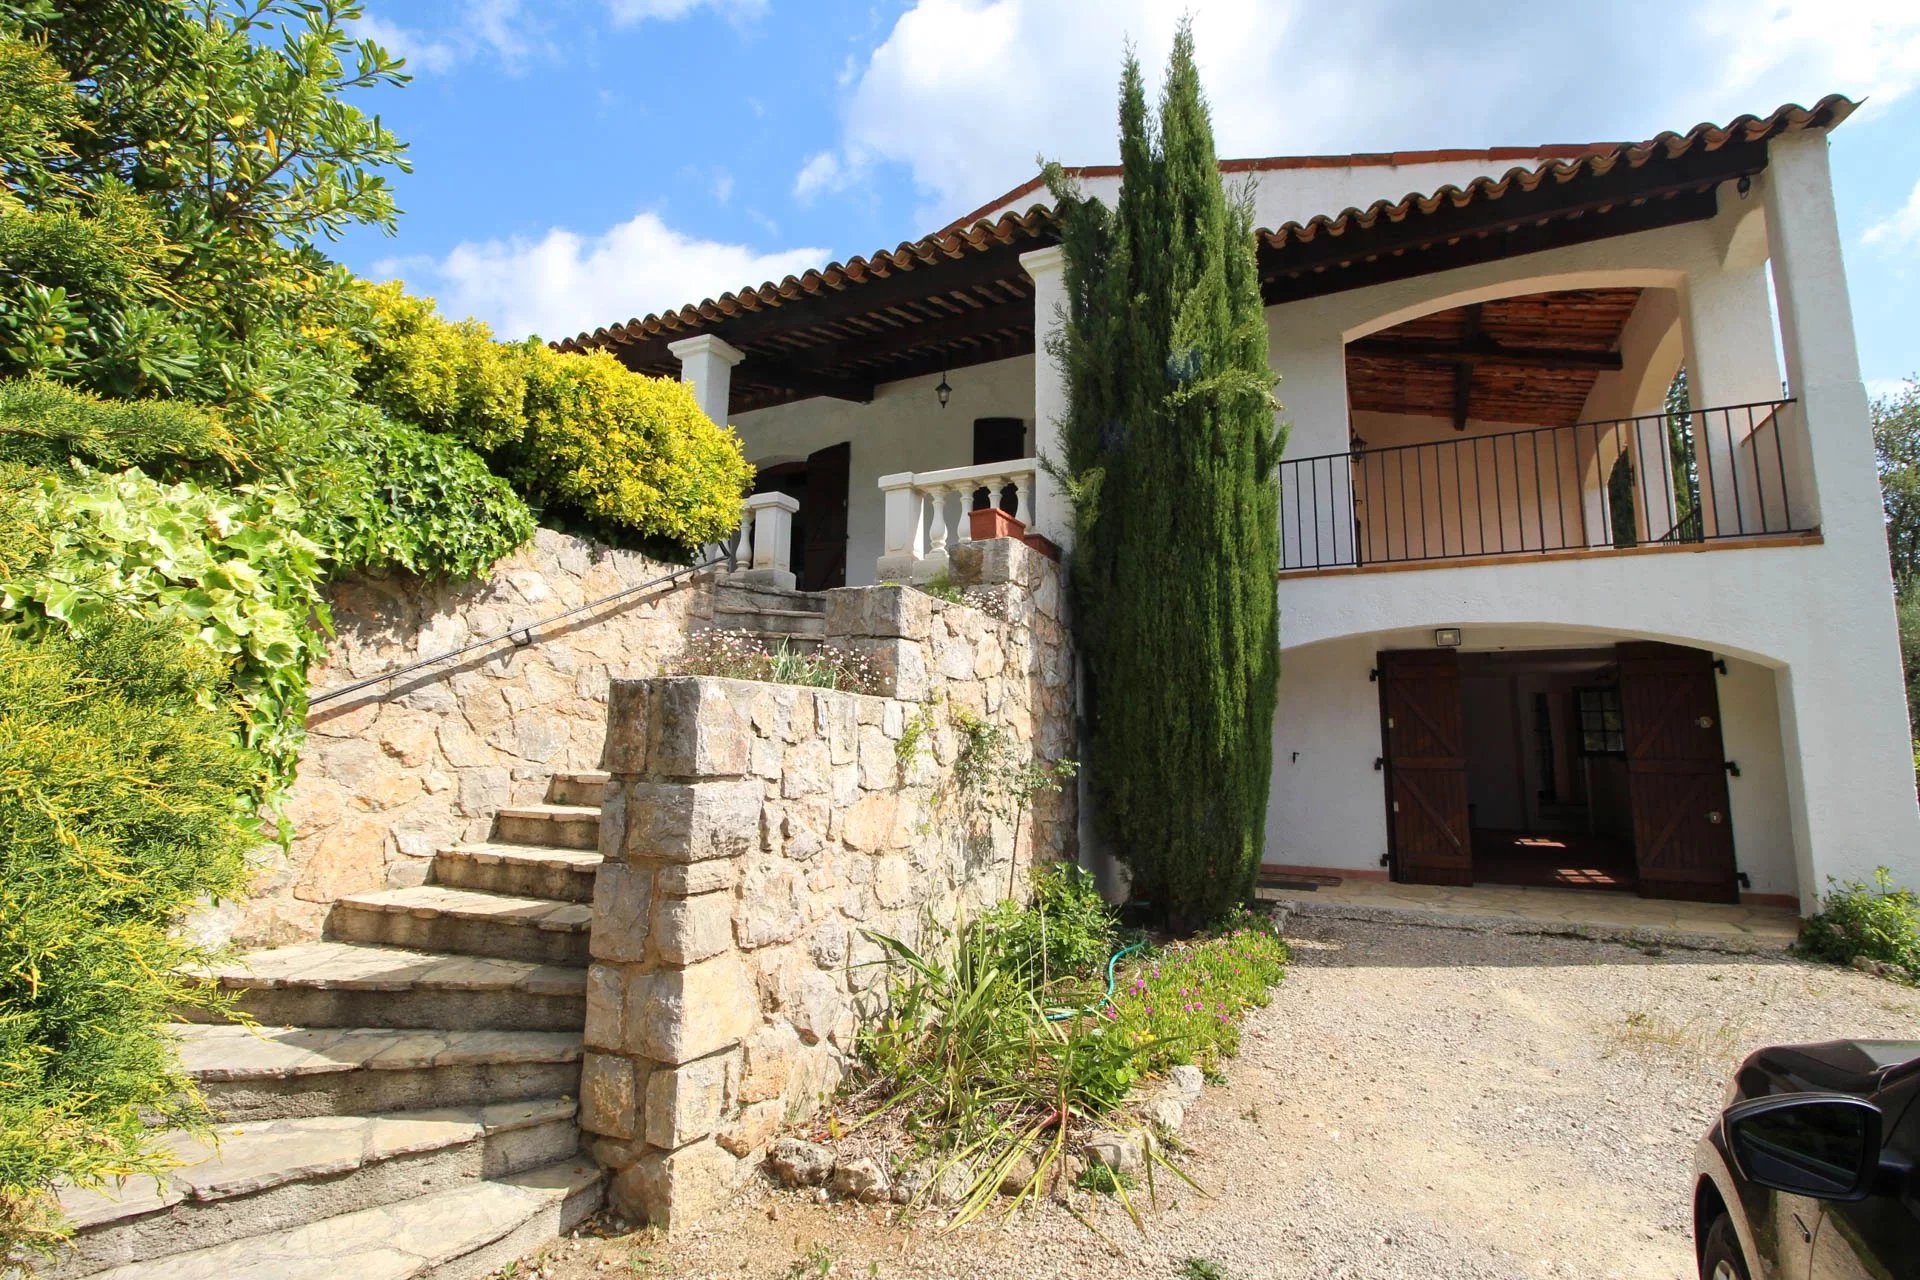 3 Bedroom House with Pool for Sale - Montauroux